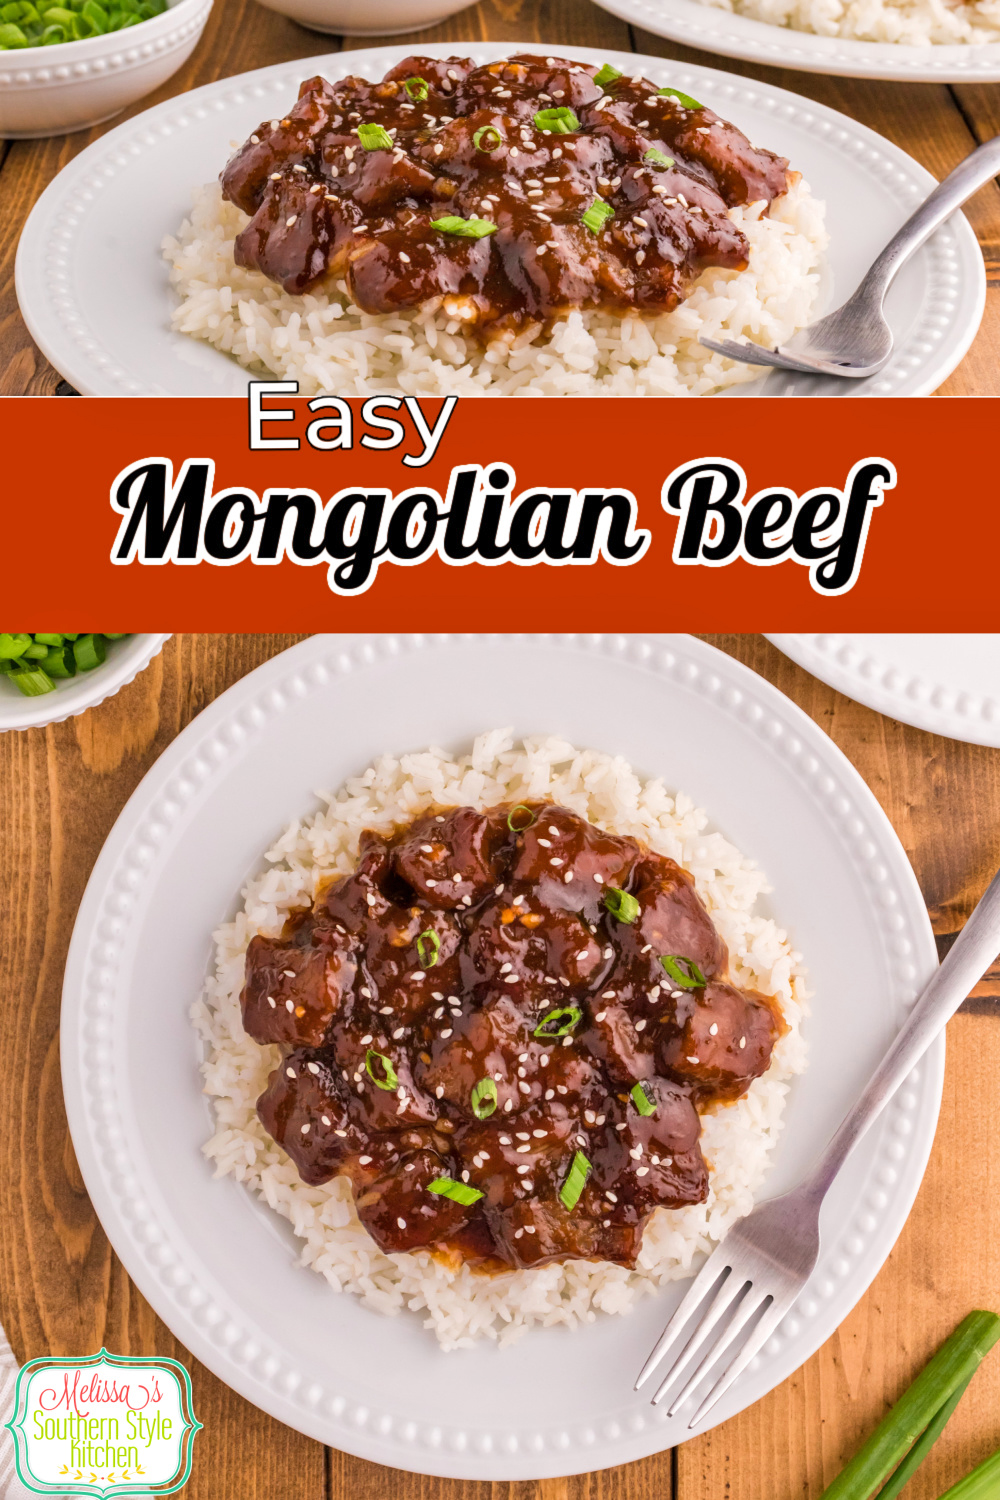 This Mongolian Beef recipe is tender and packed with Asian inspired flavors. #mongolianbeef #mongolianrecipes #takout #easybeefrecipes #steakrecipes #Asianrecipes #easysteakrecipes